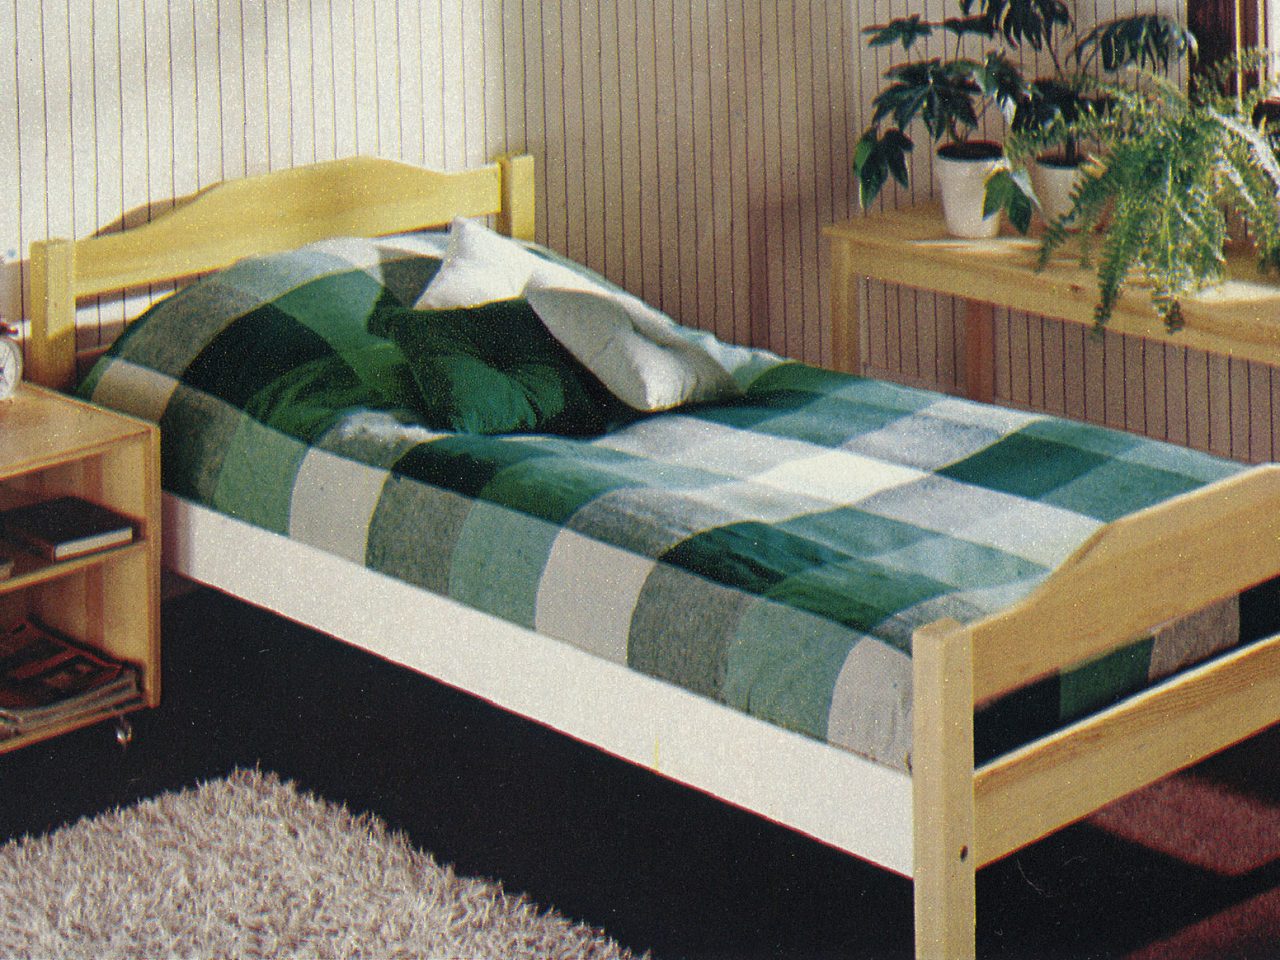 1977 IKEA catalogue image of a wooden bed with green check INDUS bedspread and a white rug on the floor.